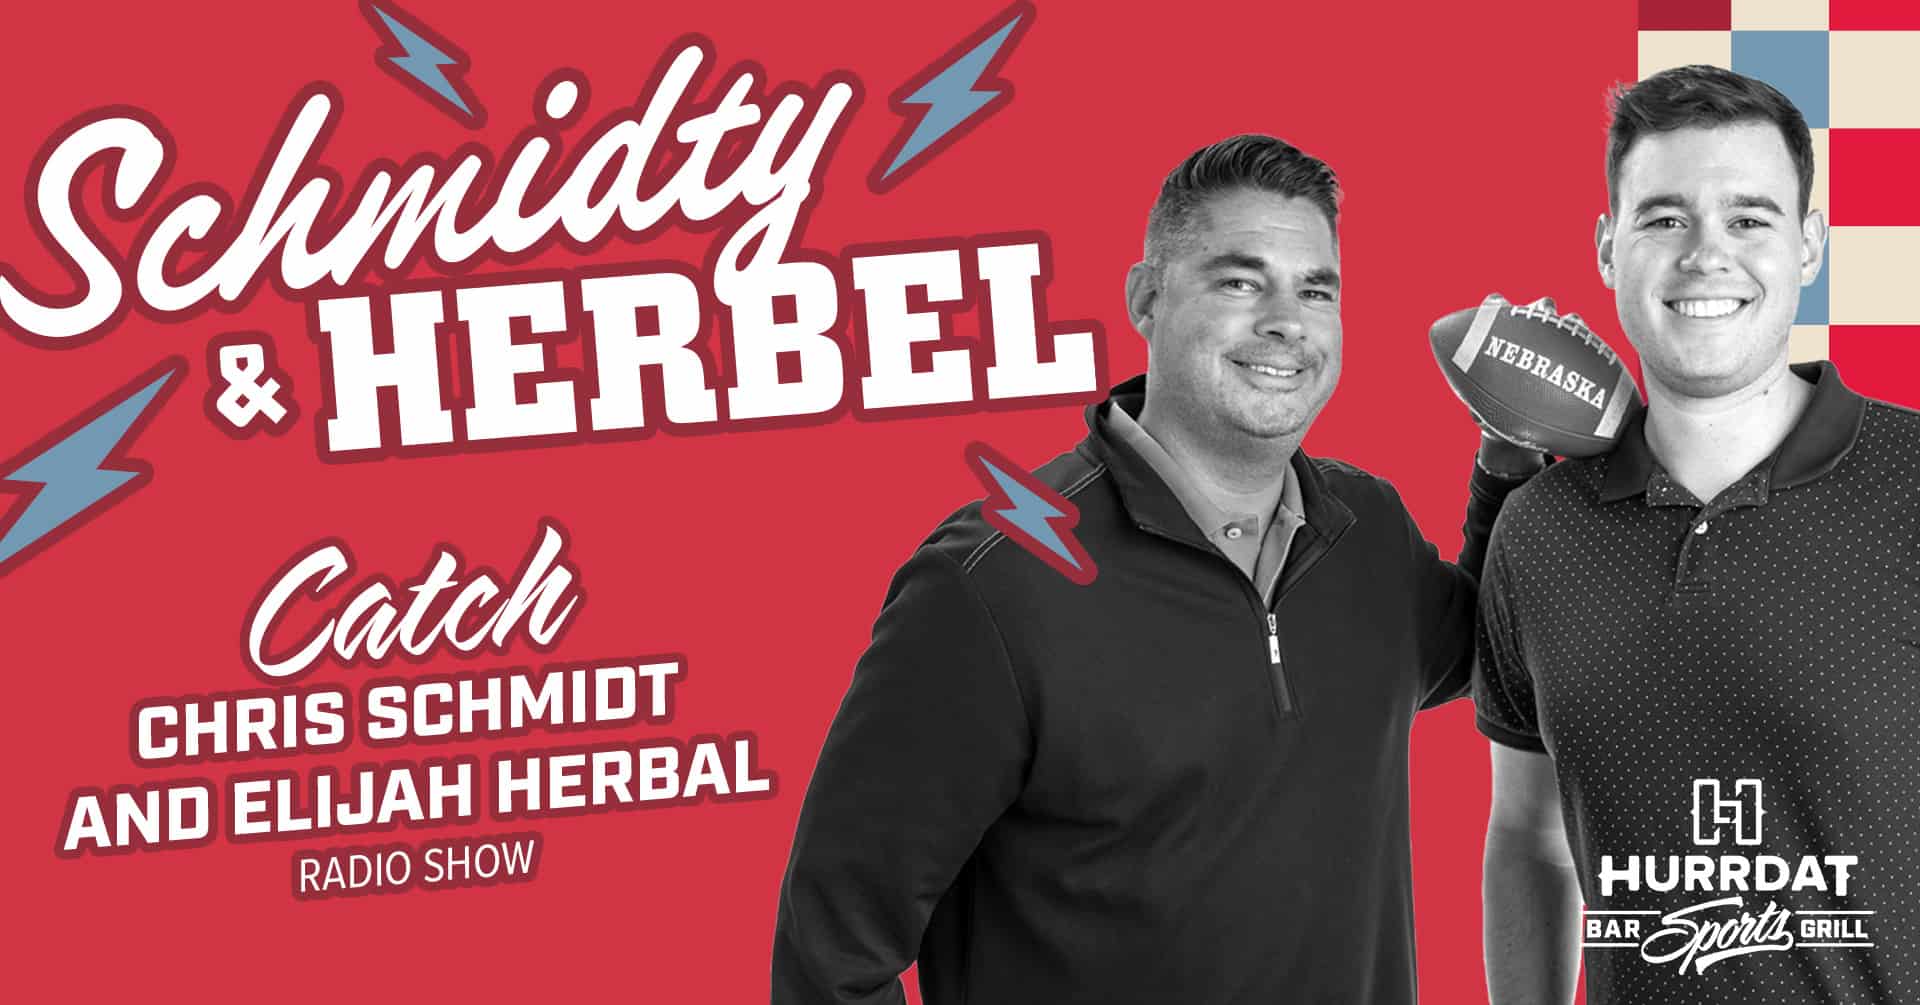 schmidty and herbel radio show live at hurrdat sports bar and grill